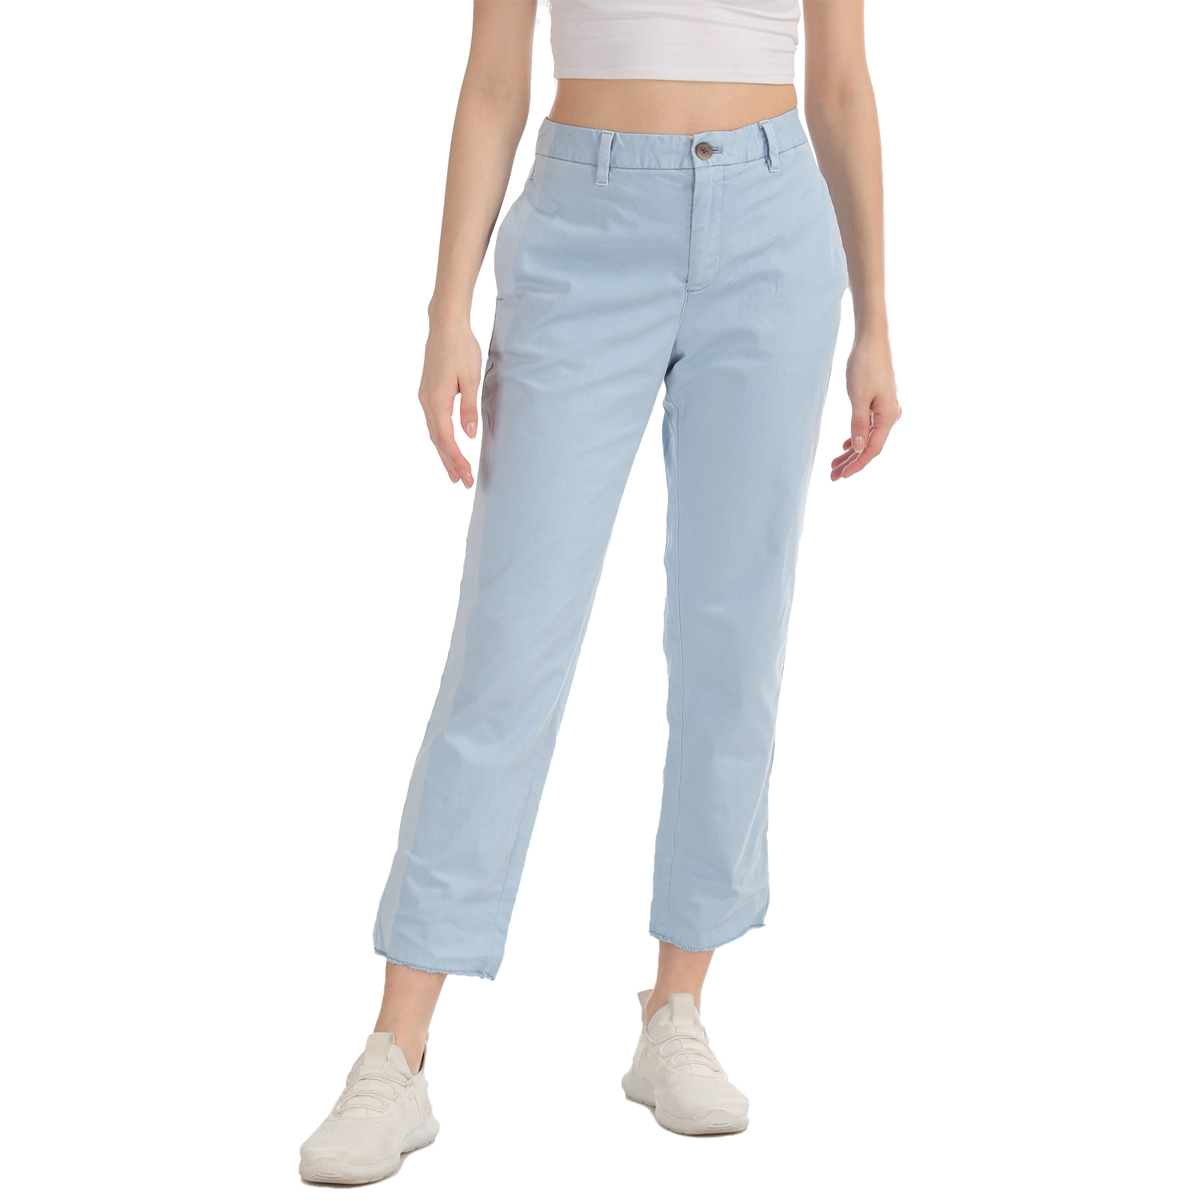 Gap Mid Rise Girlfriend Fit Solid Color Trouser Styled with Raw Hem & Faded Side Seam Line - Blue, Size-10